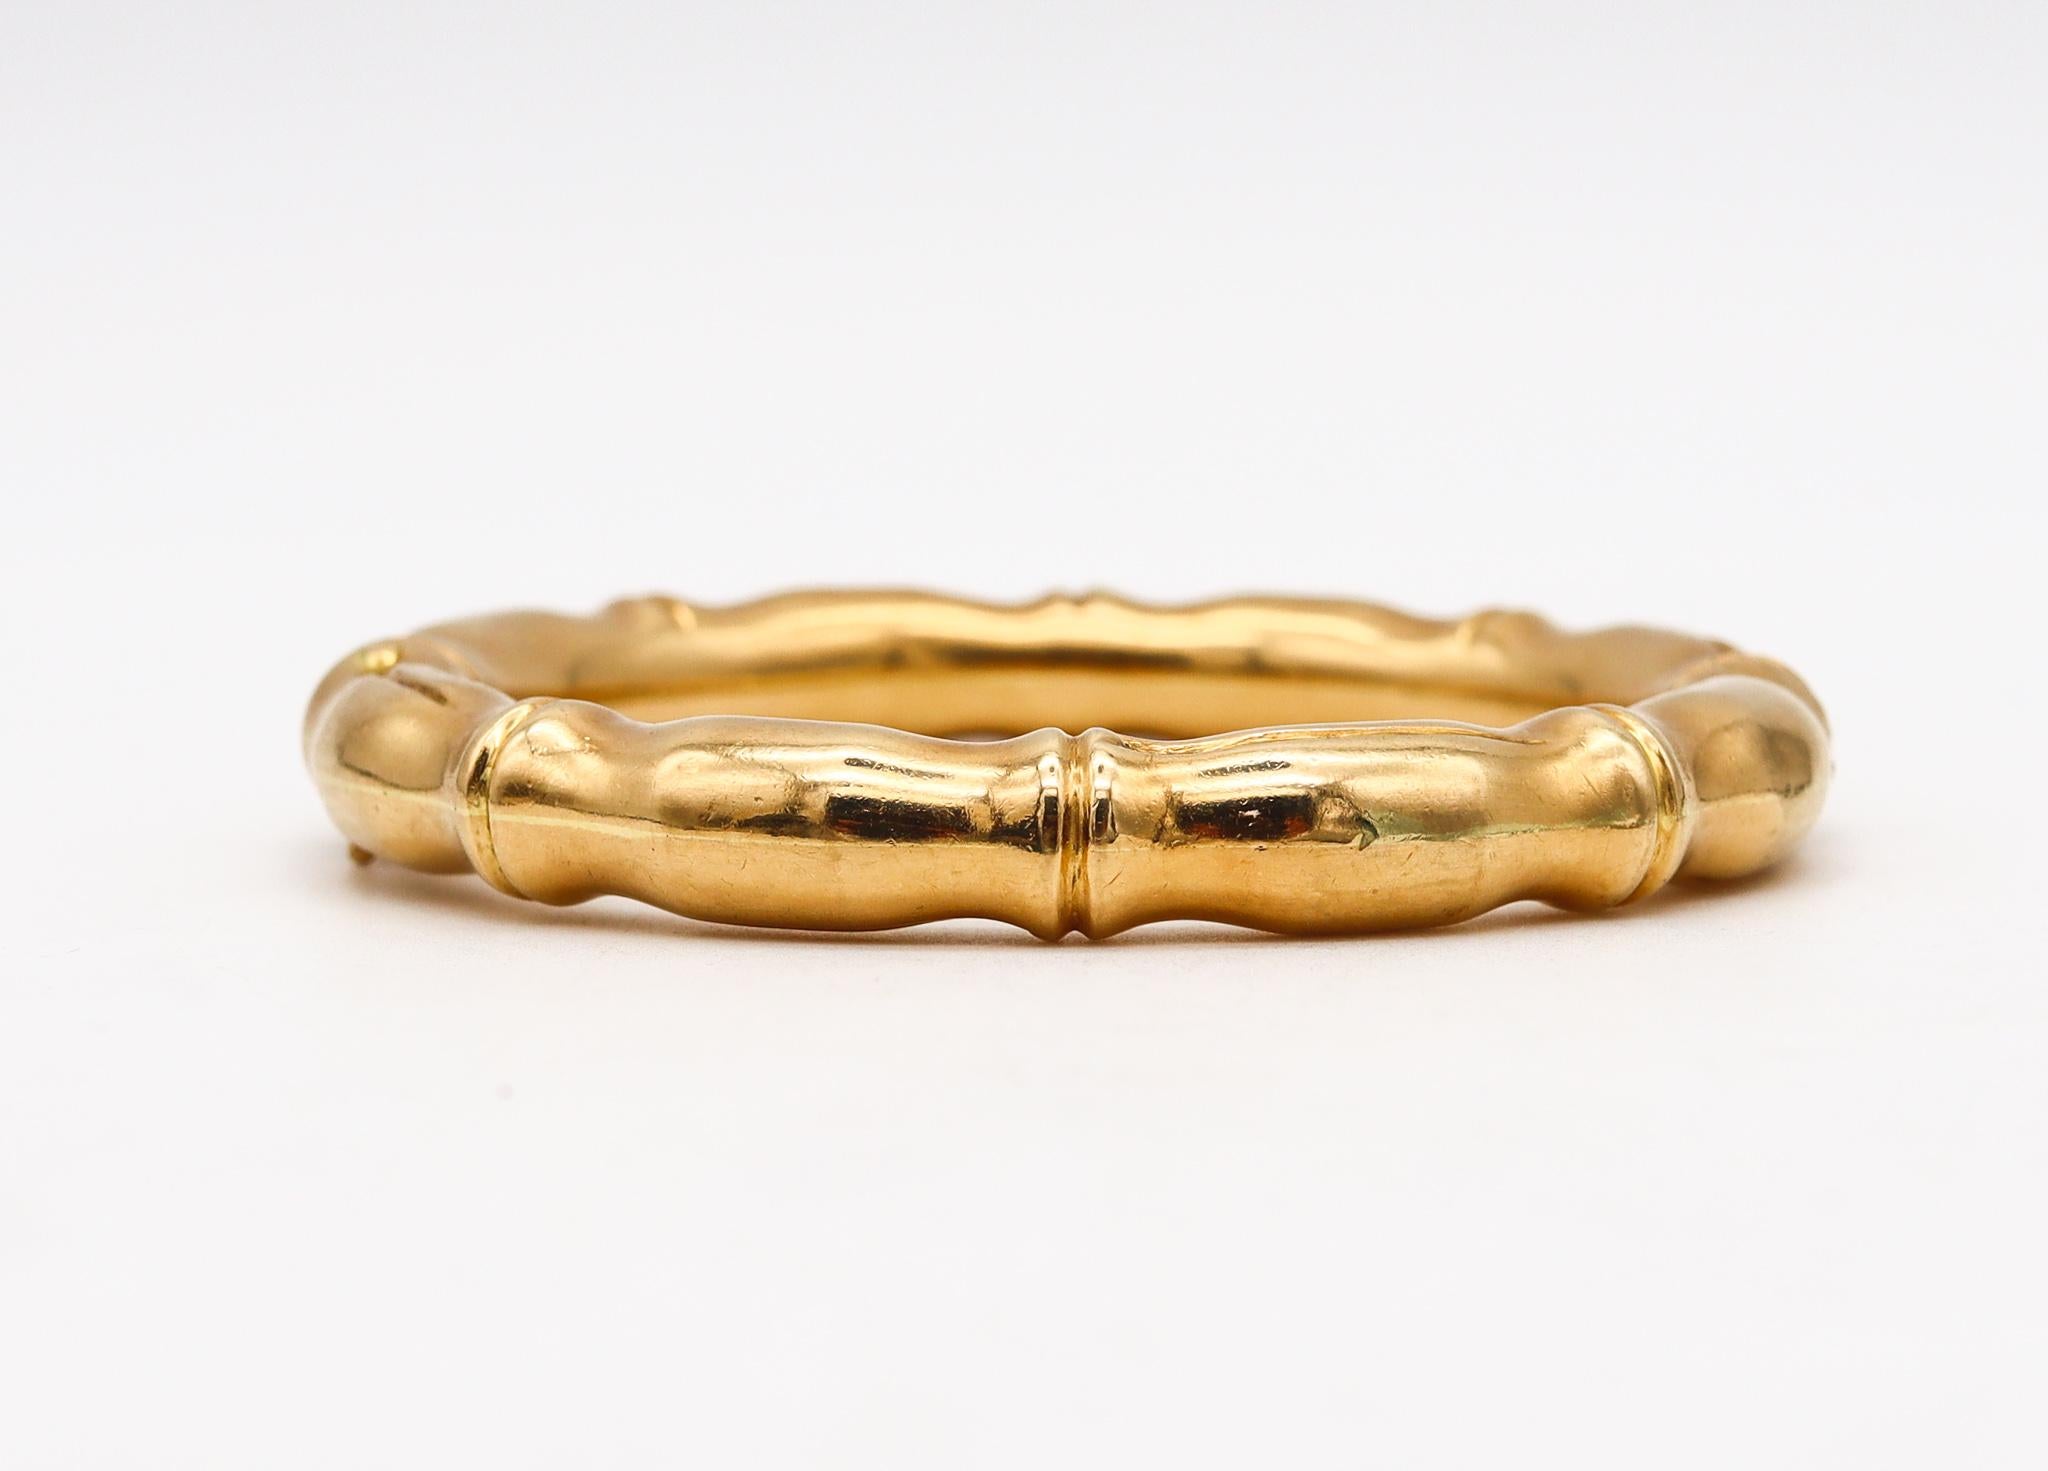 Bamboo bangle bracelet designed Carlo Weingrill for Tiffany & Co.

Very rare Tiffany & Co. Bamboo Bangle Bracelet created circa 1970's. It was crafted from solid yellow gold of 18 karats featuring a bamboo pattern with eight nodes and even